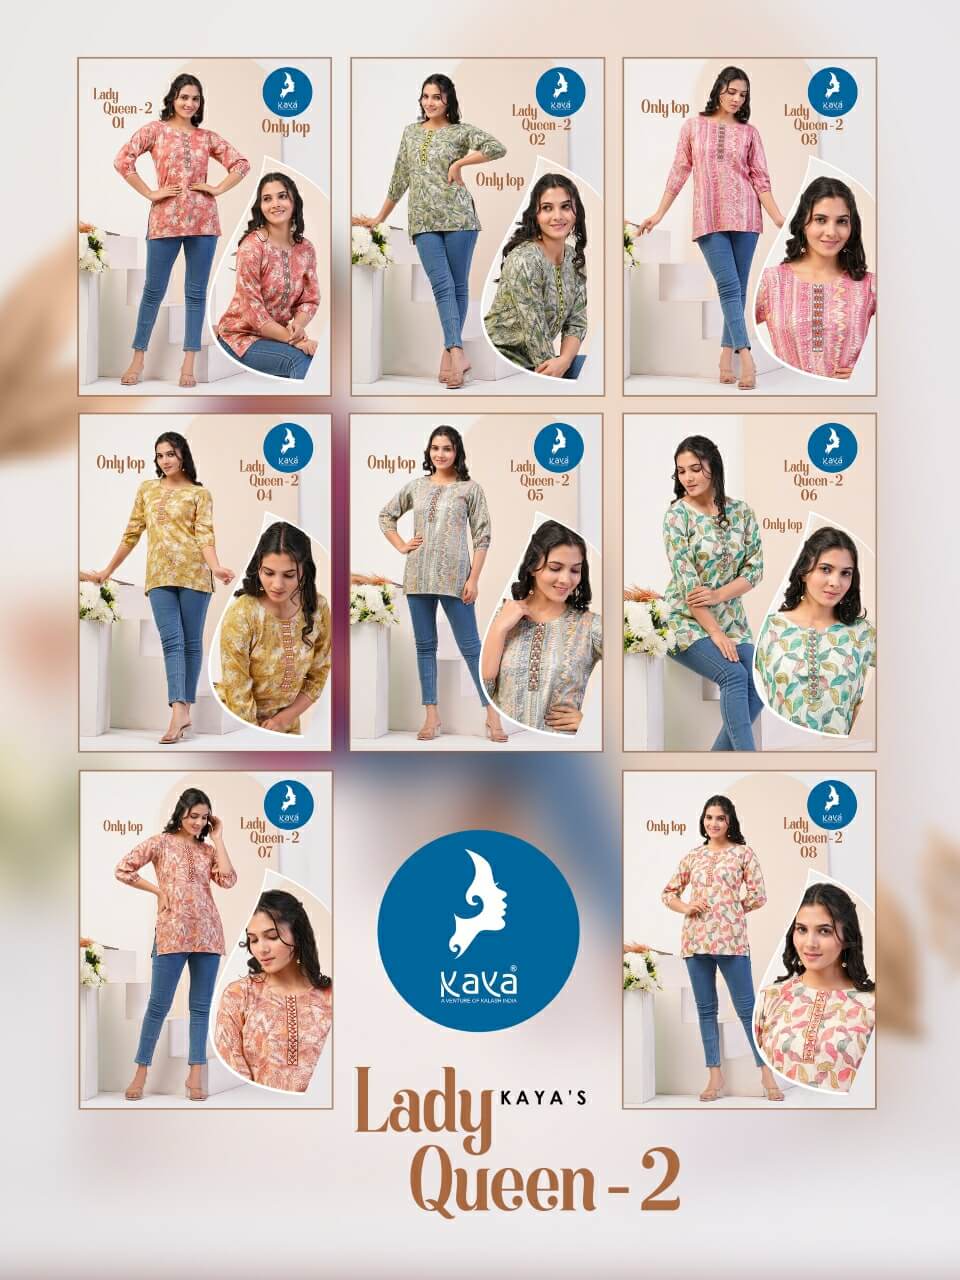 Kaya Lady Queen Vol 2 Ladies Tops Catalog collection 10